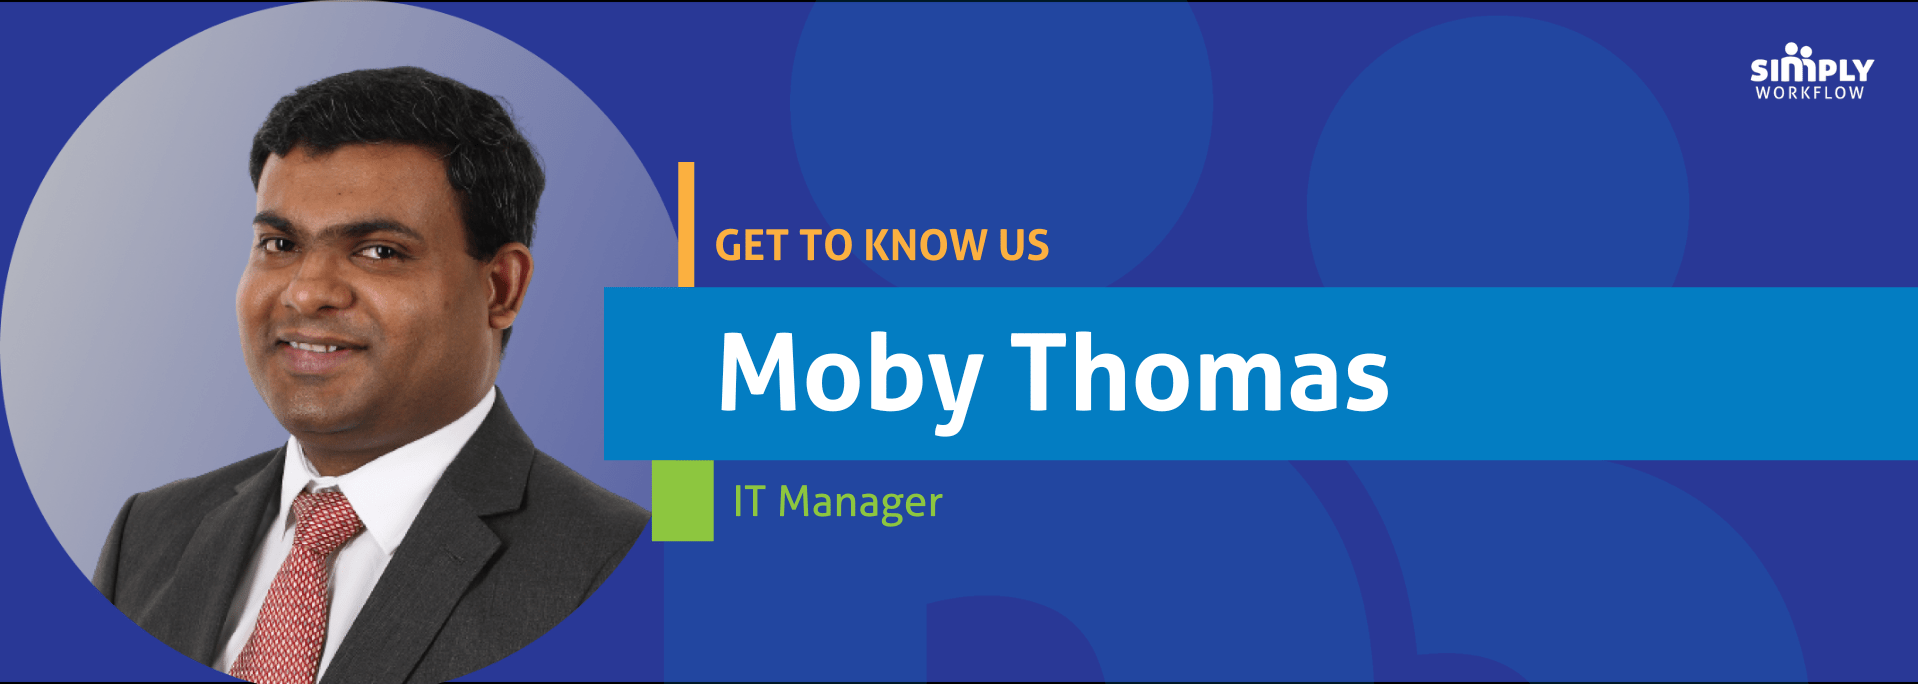 Moby Thomas - Simply Workflow Get to Know Us